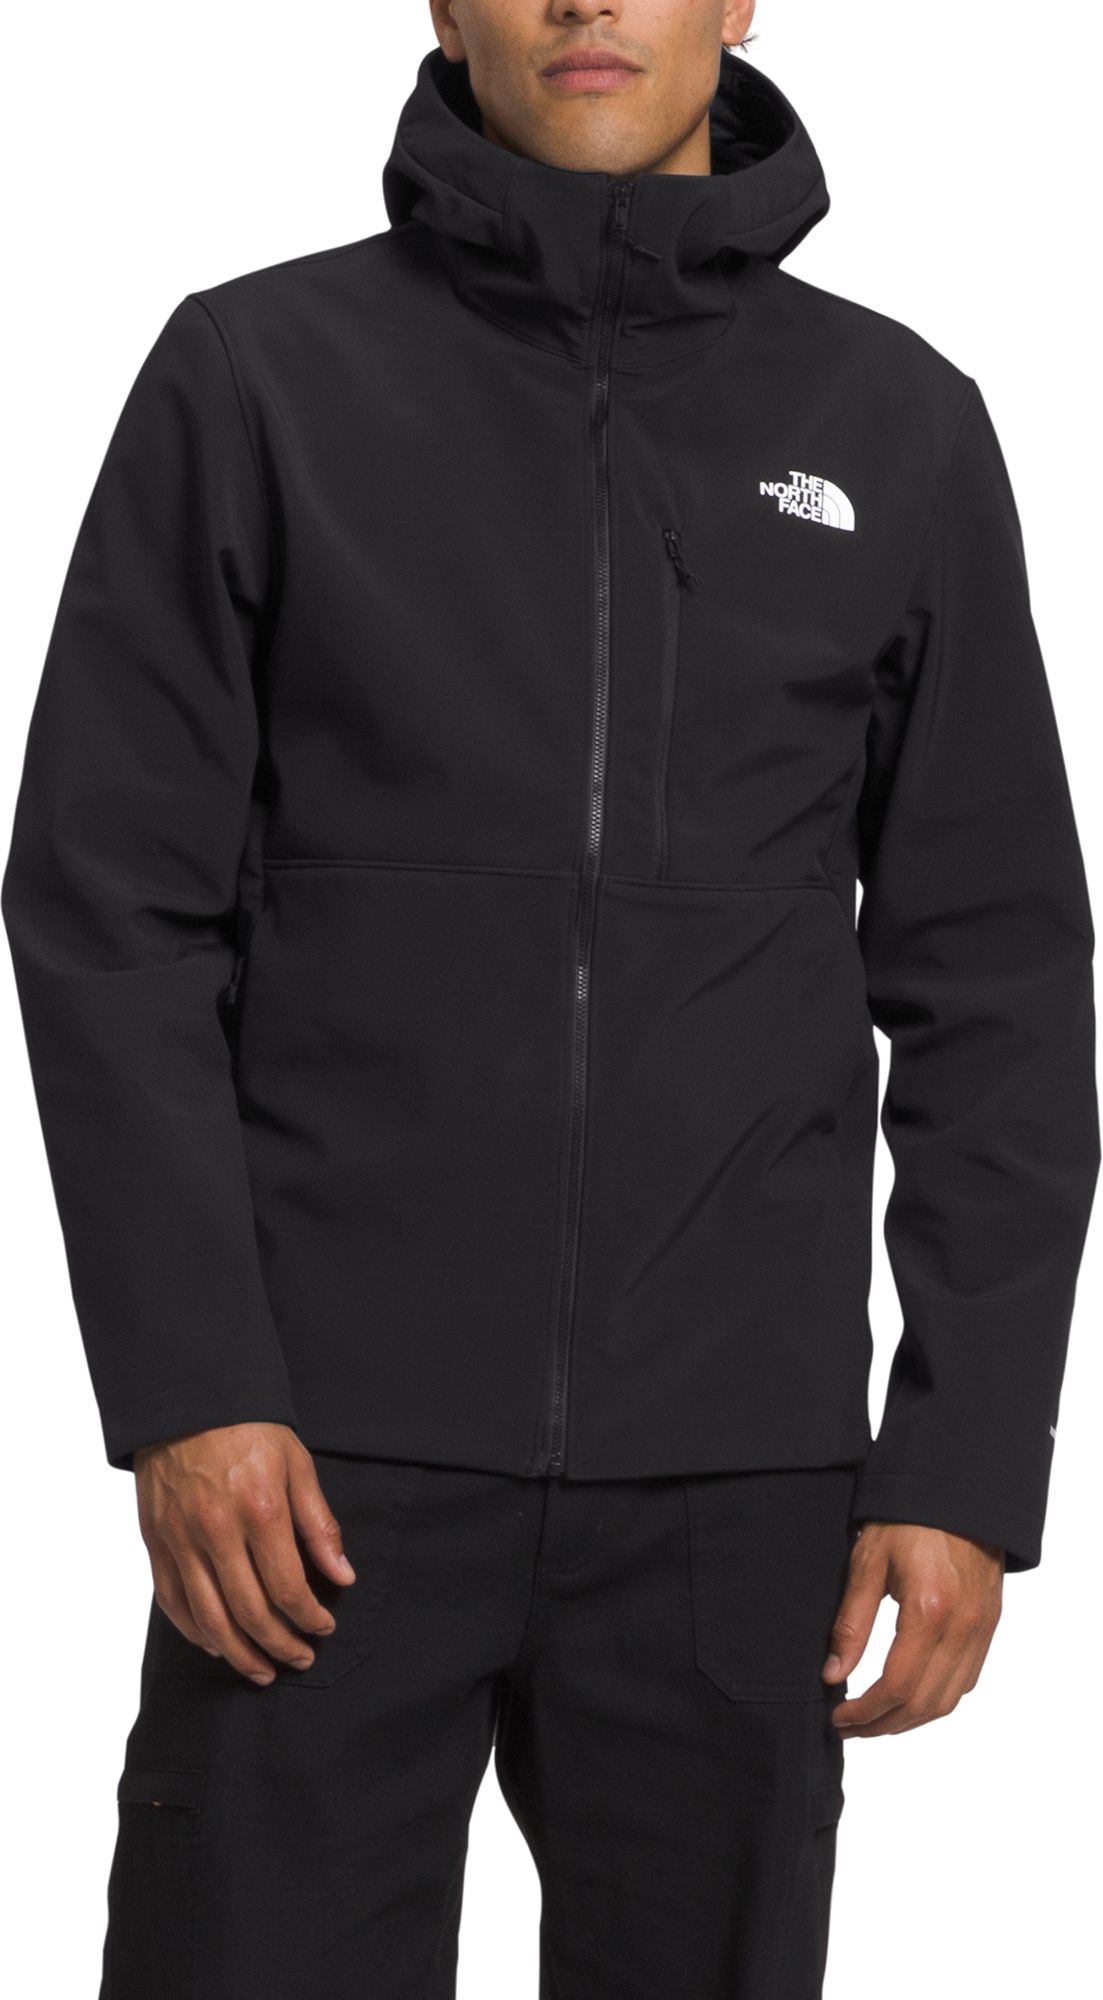 The North Face Men's Apex Bionic 3 Hoodie